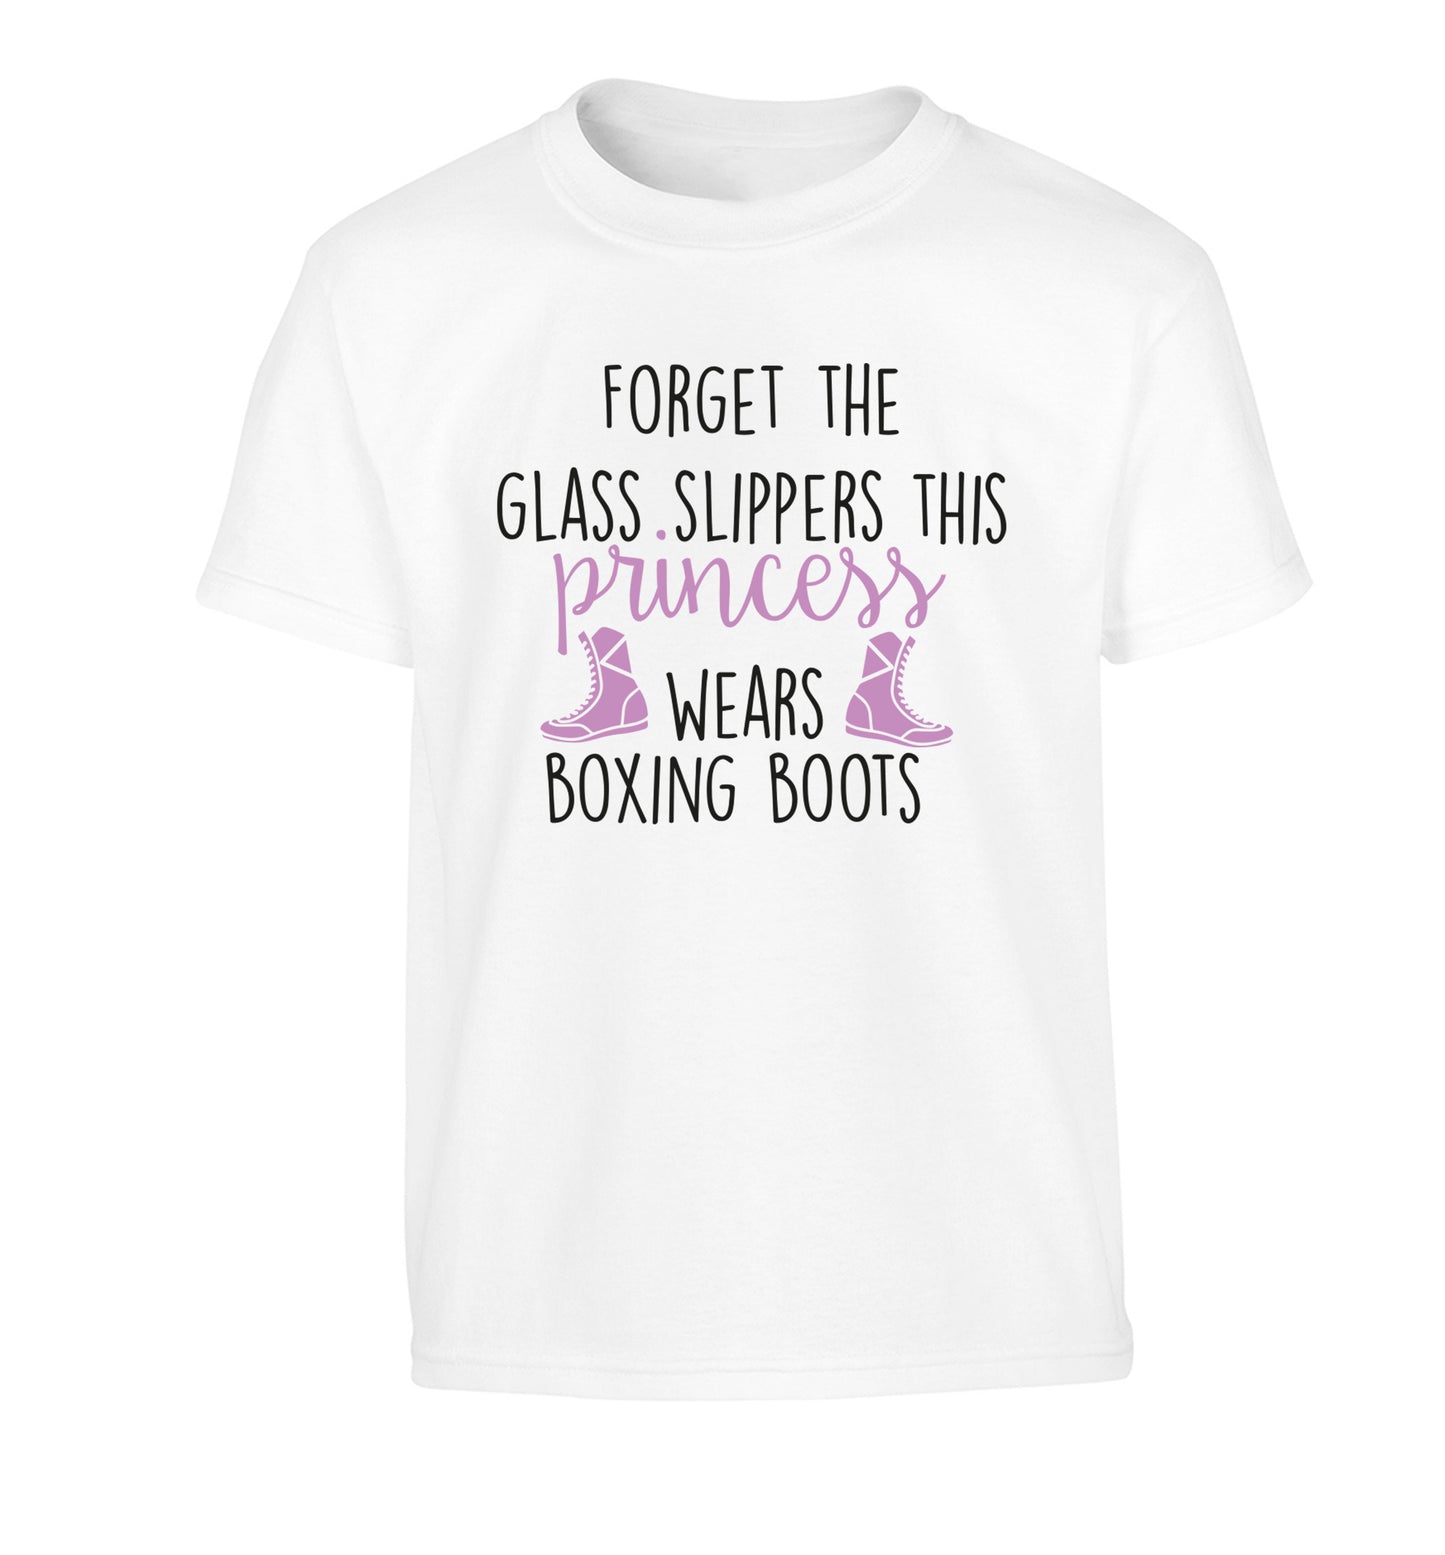 Forget the glass slippers this princess wears boxing boots Children's white Tshirt 12-14 Years